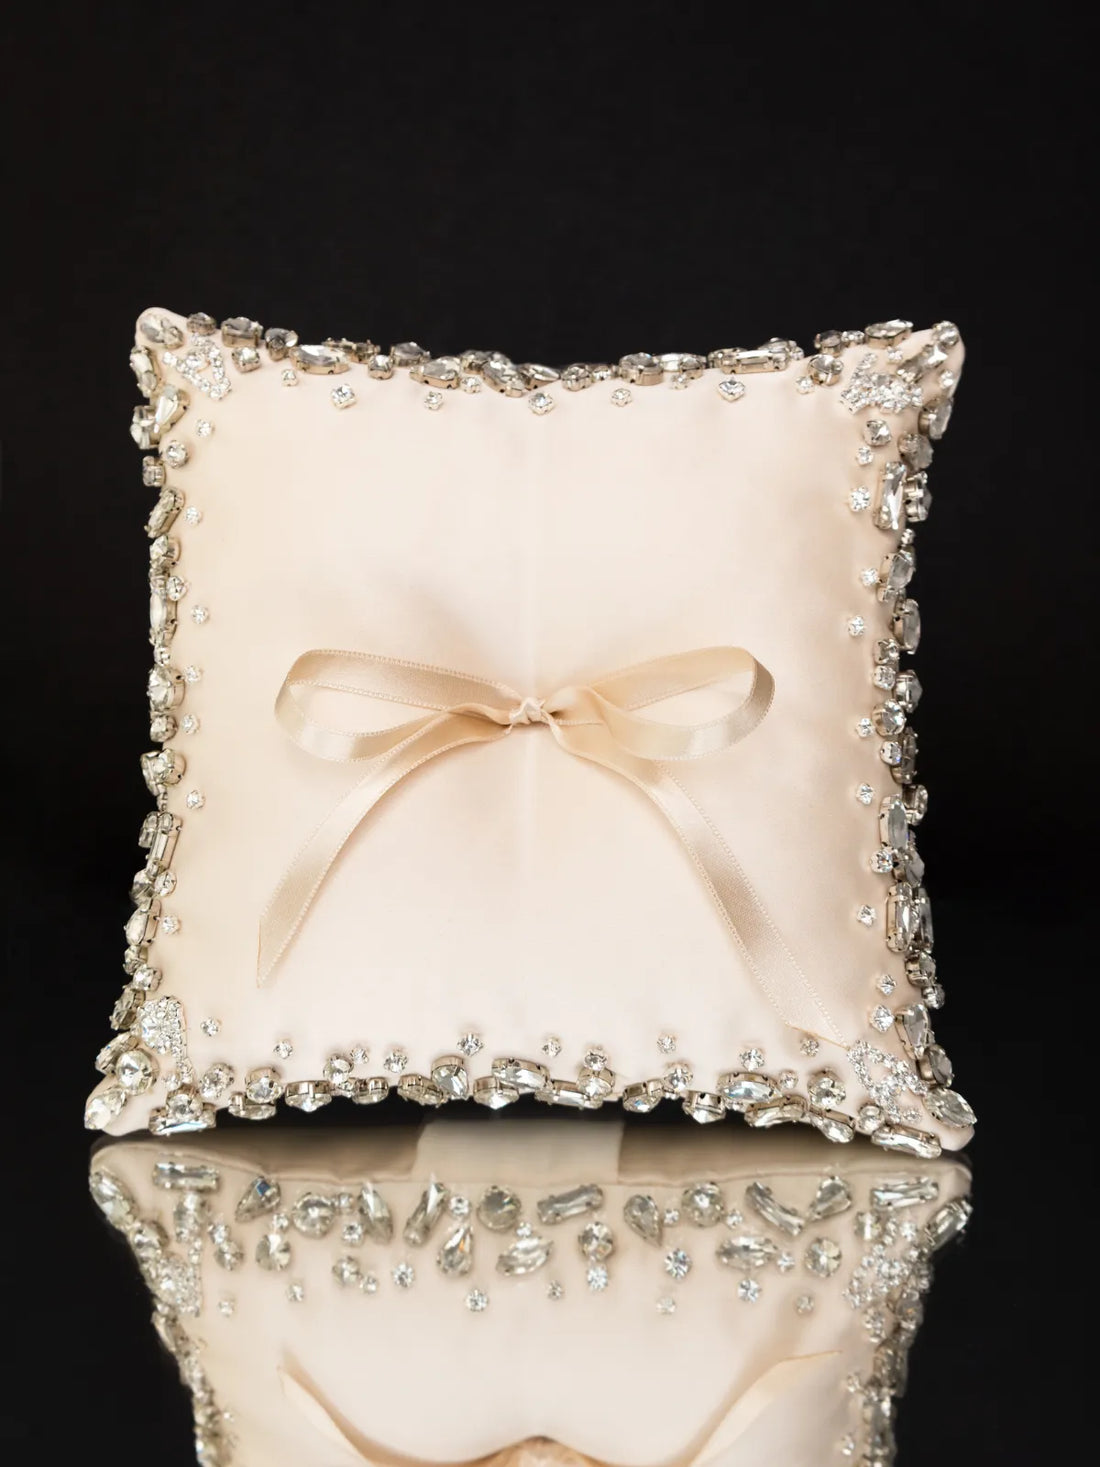 Wedding Pillow For Rings In Ivory